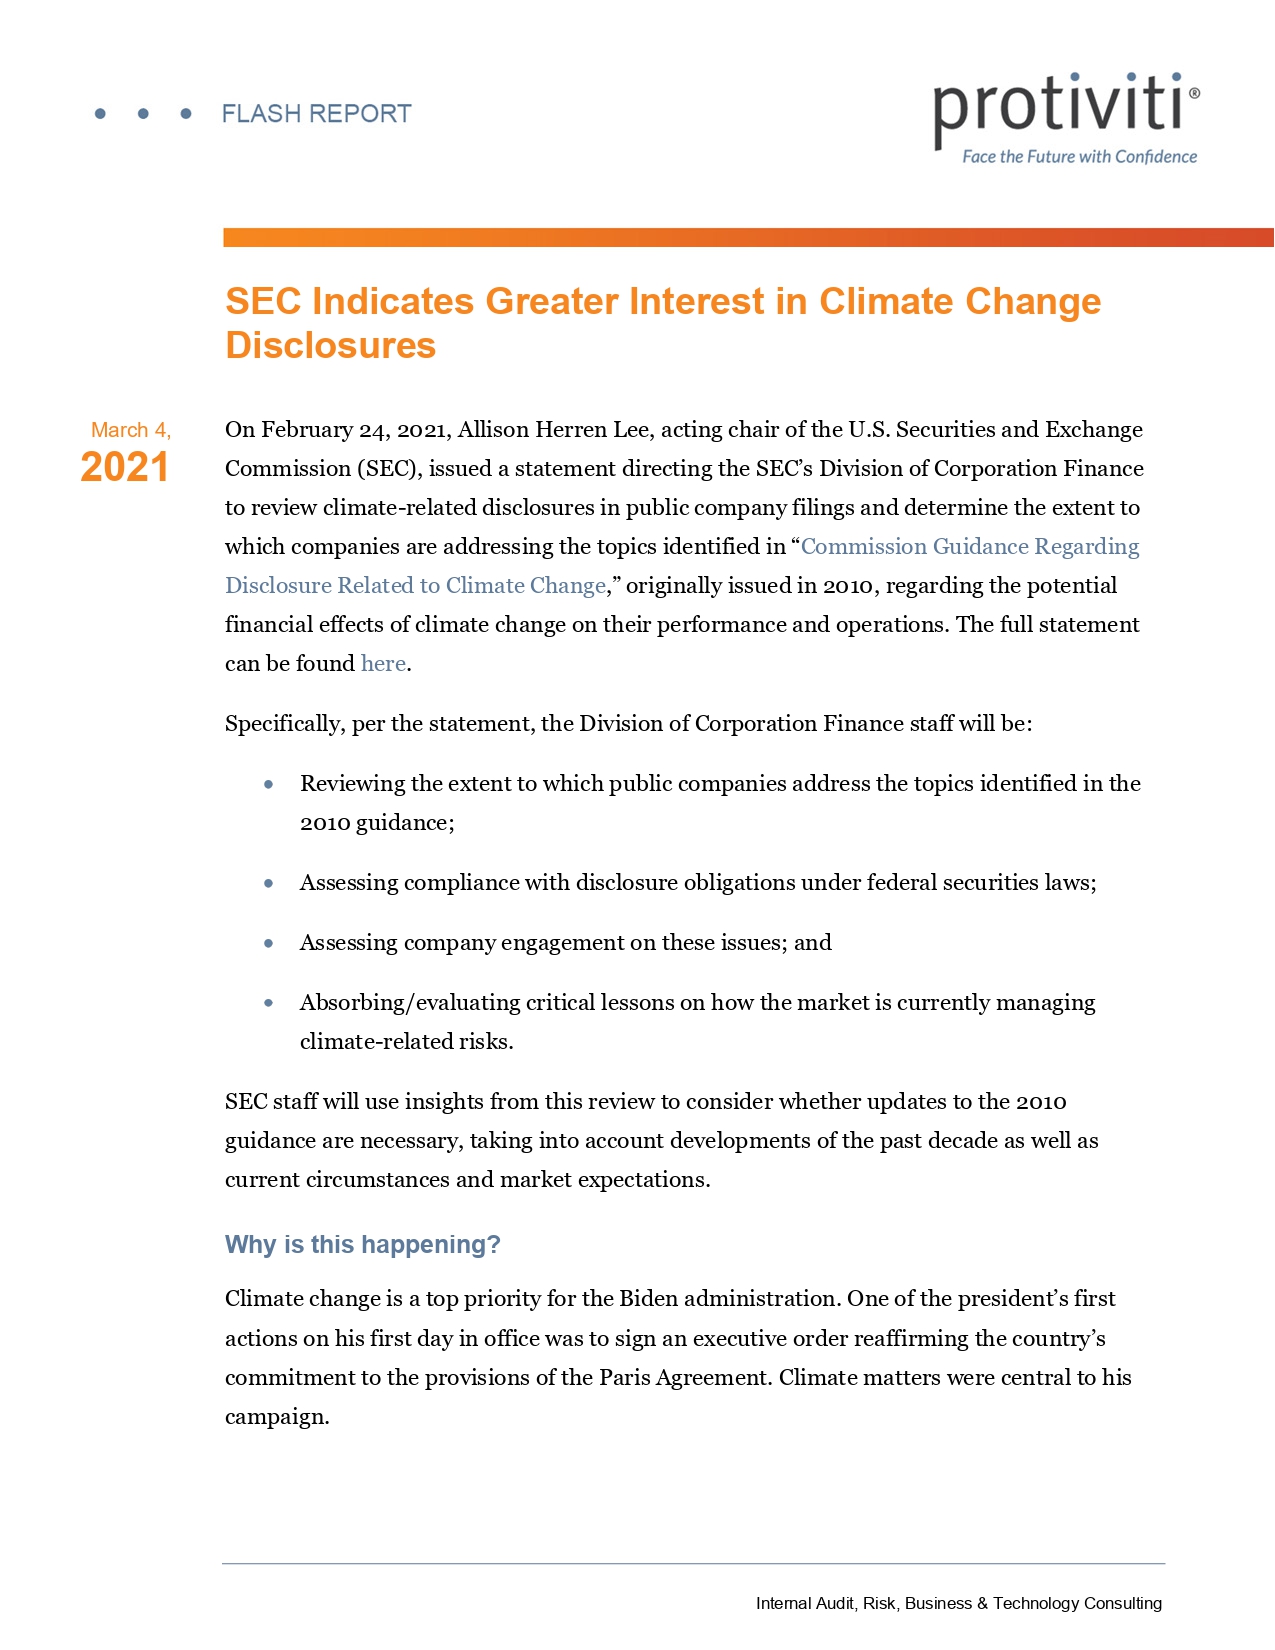 SEC Indicates Greater Interest in Climate Change Disclosures